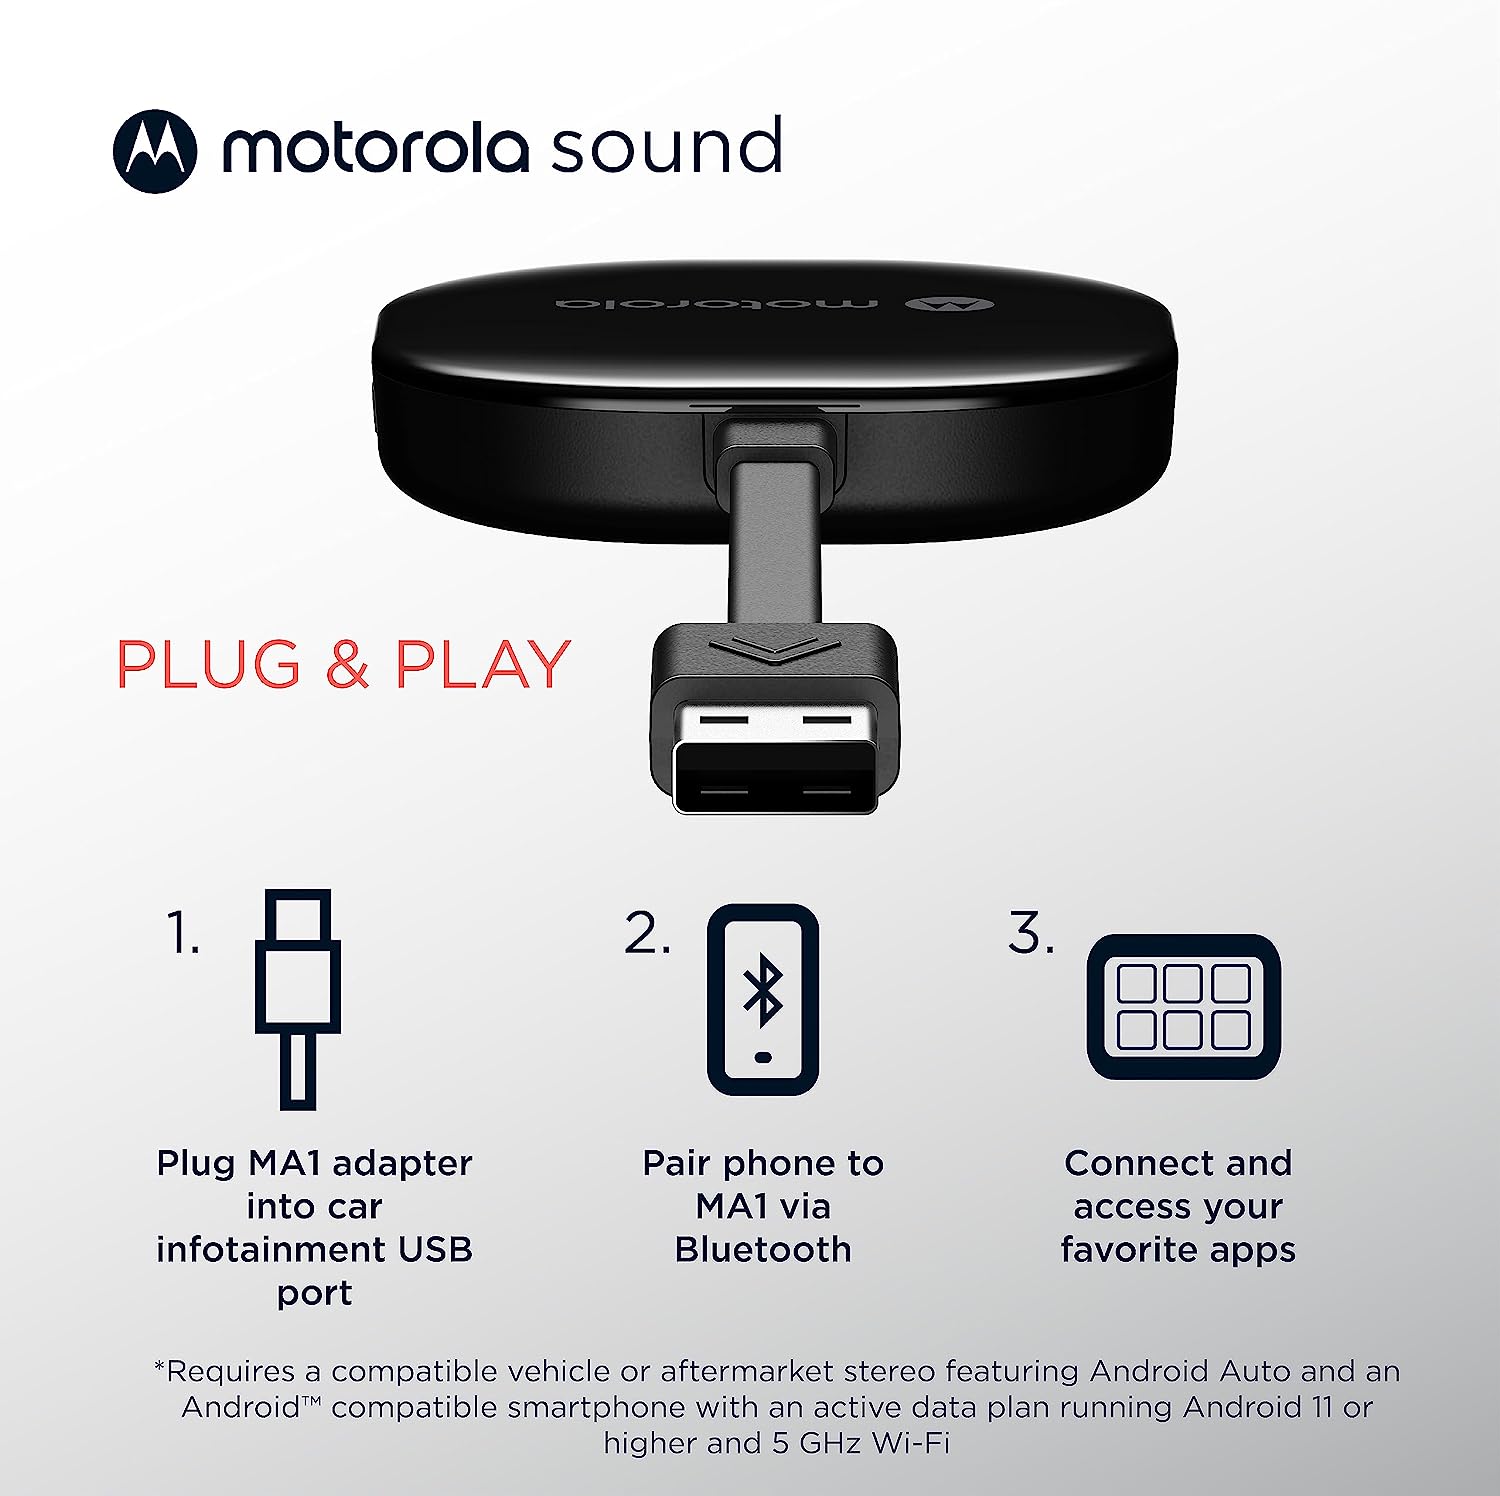 NEW MOTOROLA MA1 WIRELESS CAR ADAPTER FOR ANDROID AUTO (9C)